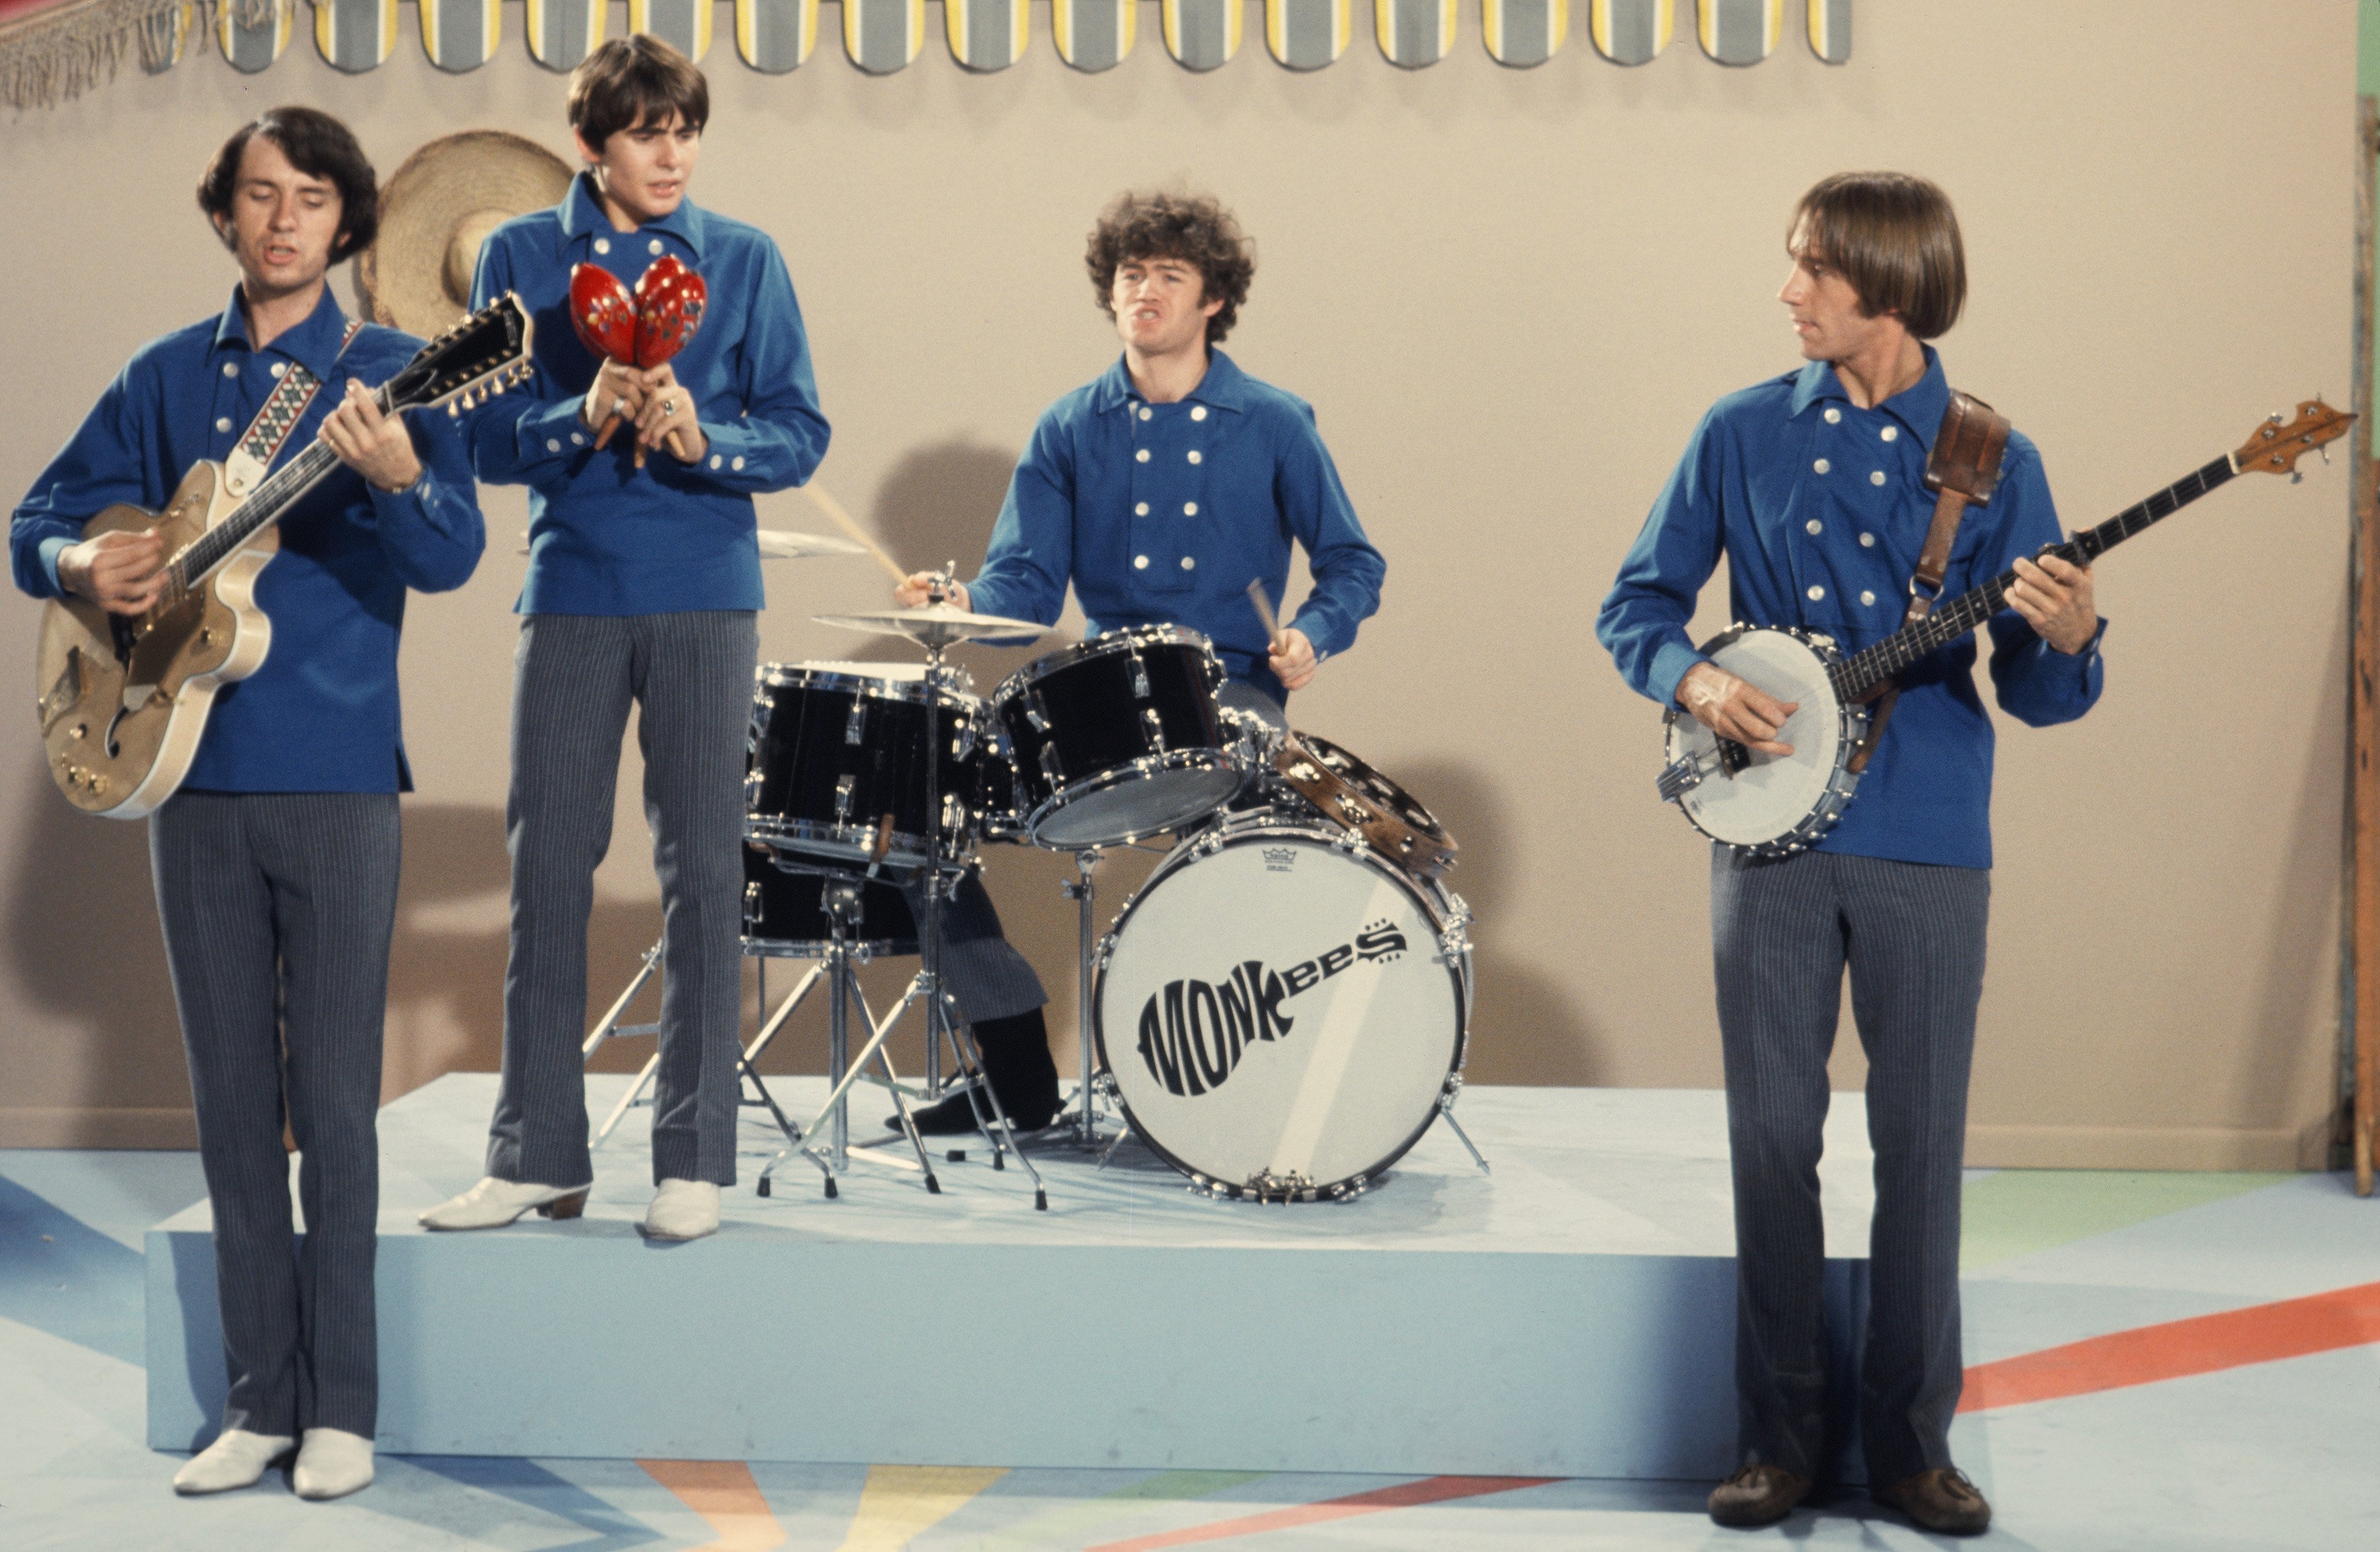 Mike Nesmith, Davy Jones, Micky Dolenz, and Peter Tork wearing blue during The Monkees' "Last Train to Clarksville" era